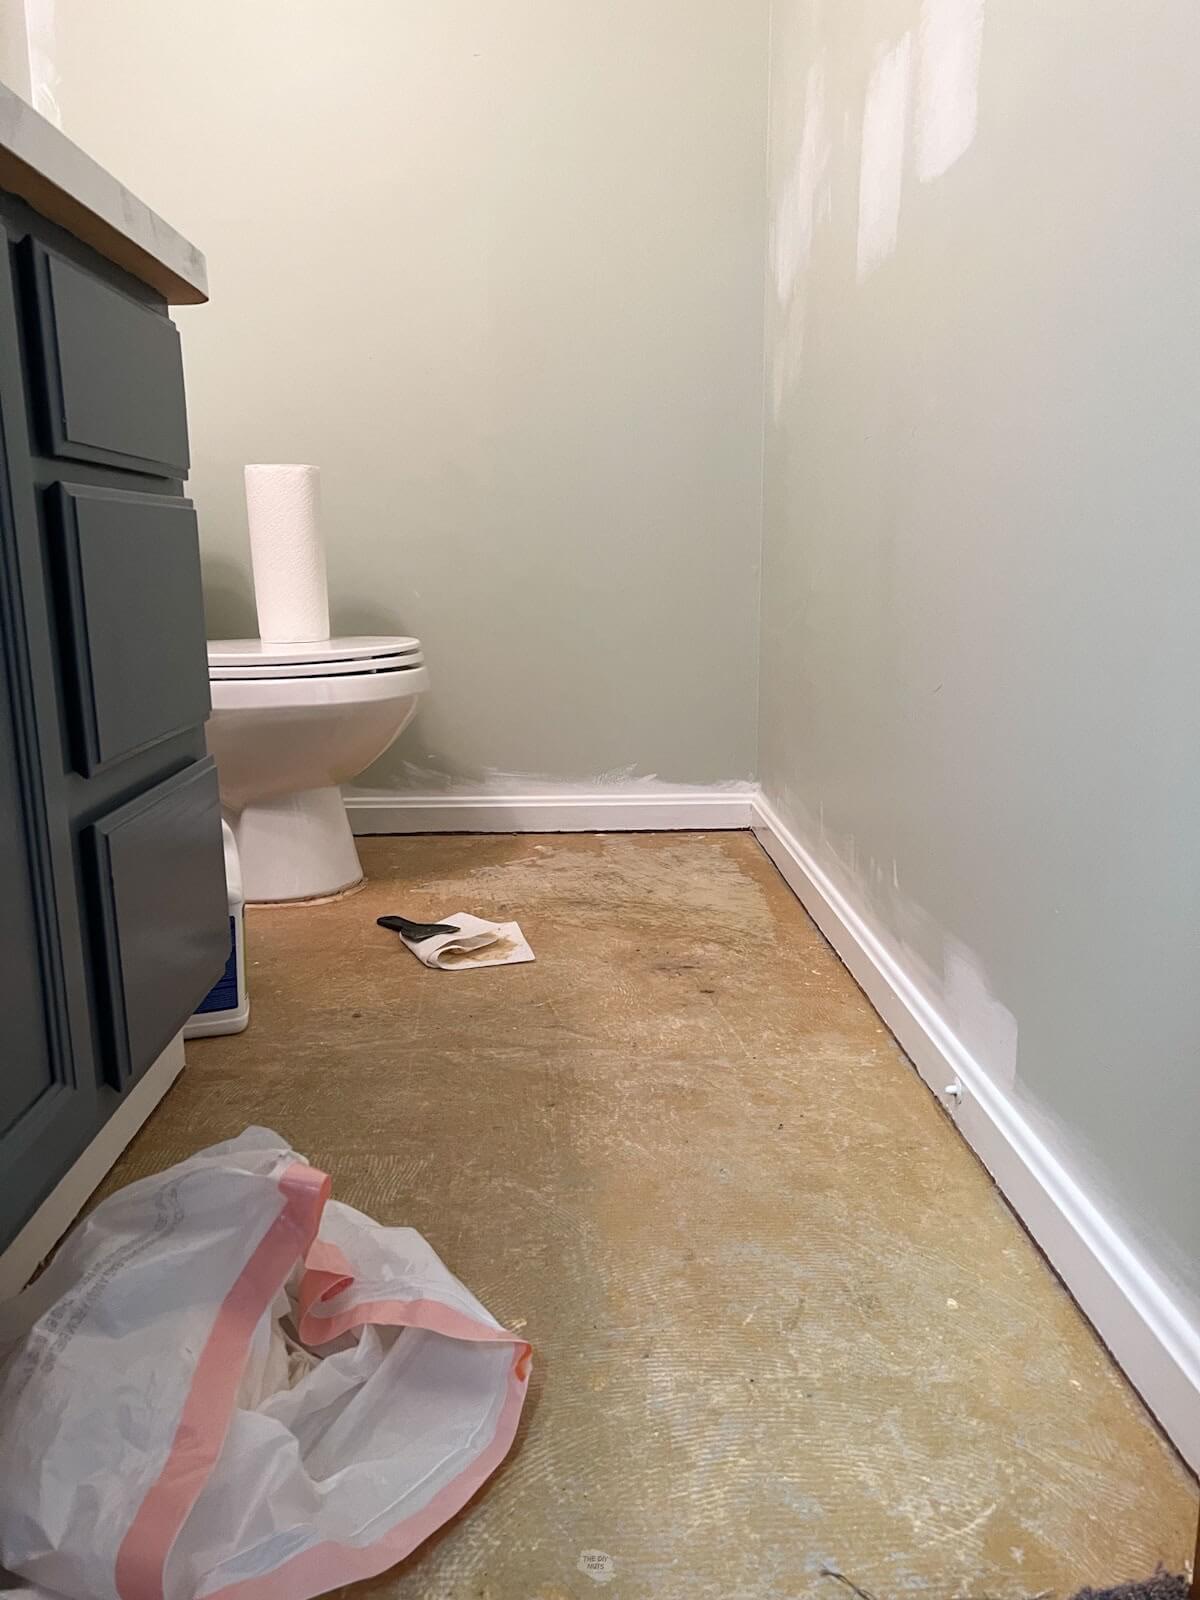 small bathroom with paint on walls, caret glue removal in process.